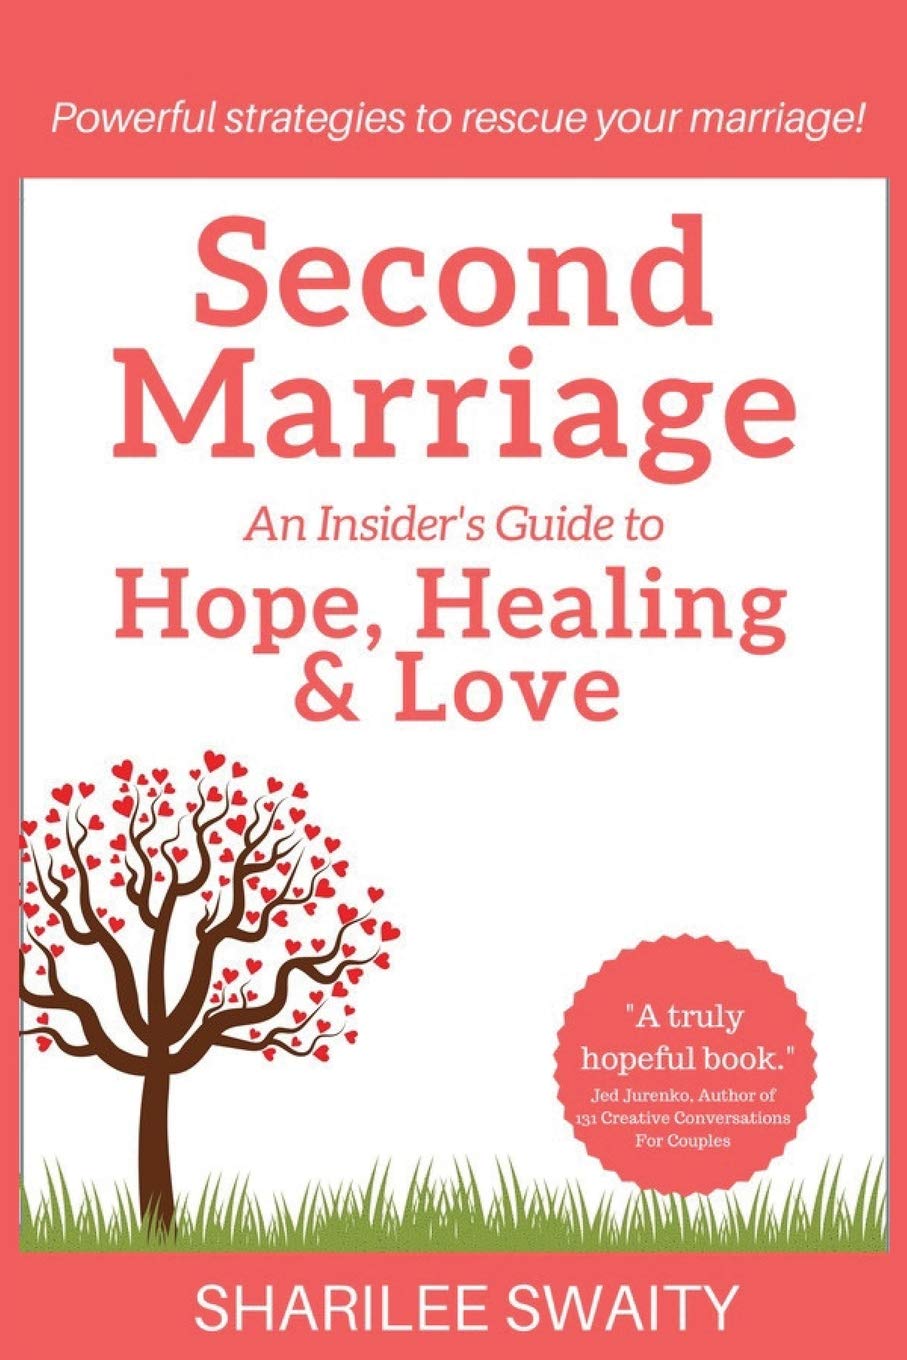 Second Marriage: An Insider's Guide to Hope, Healing and Love Paperback – 26 Jun 2017